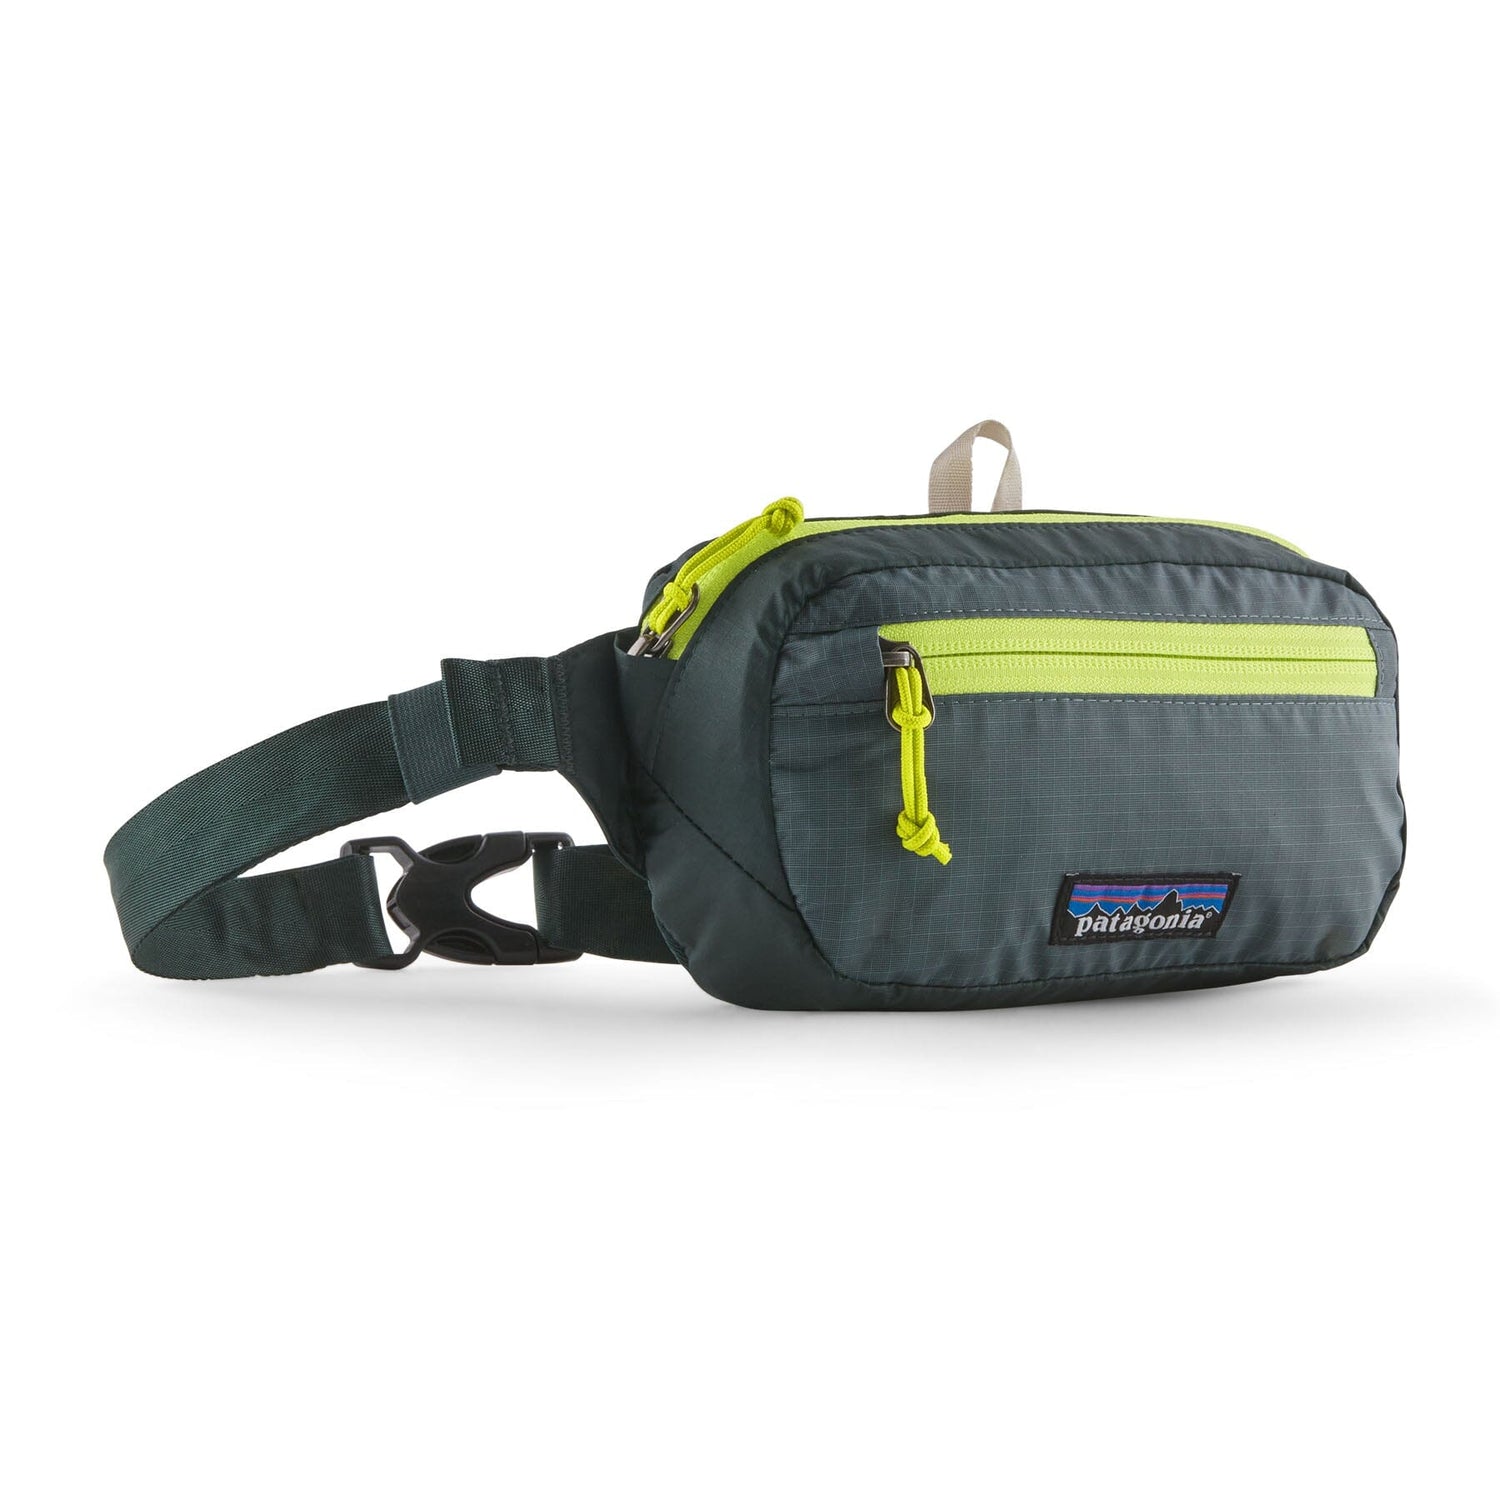 Patagonia Ultralight Black Hole Mini Hip Pack 1L - Recycled Nylon Nouveau Green Bags